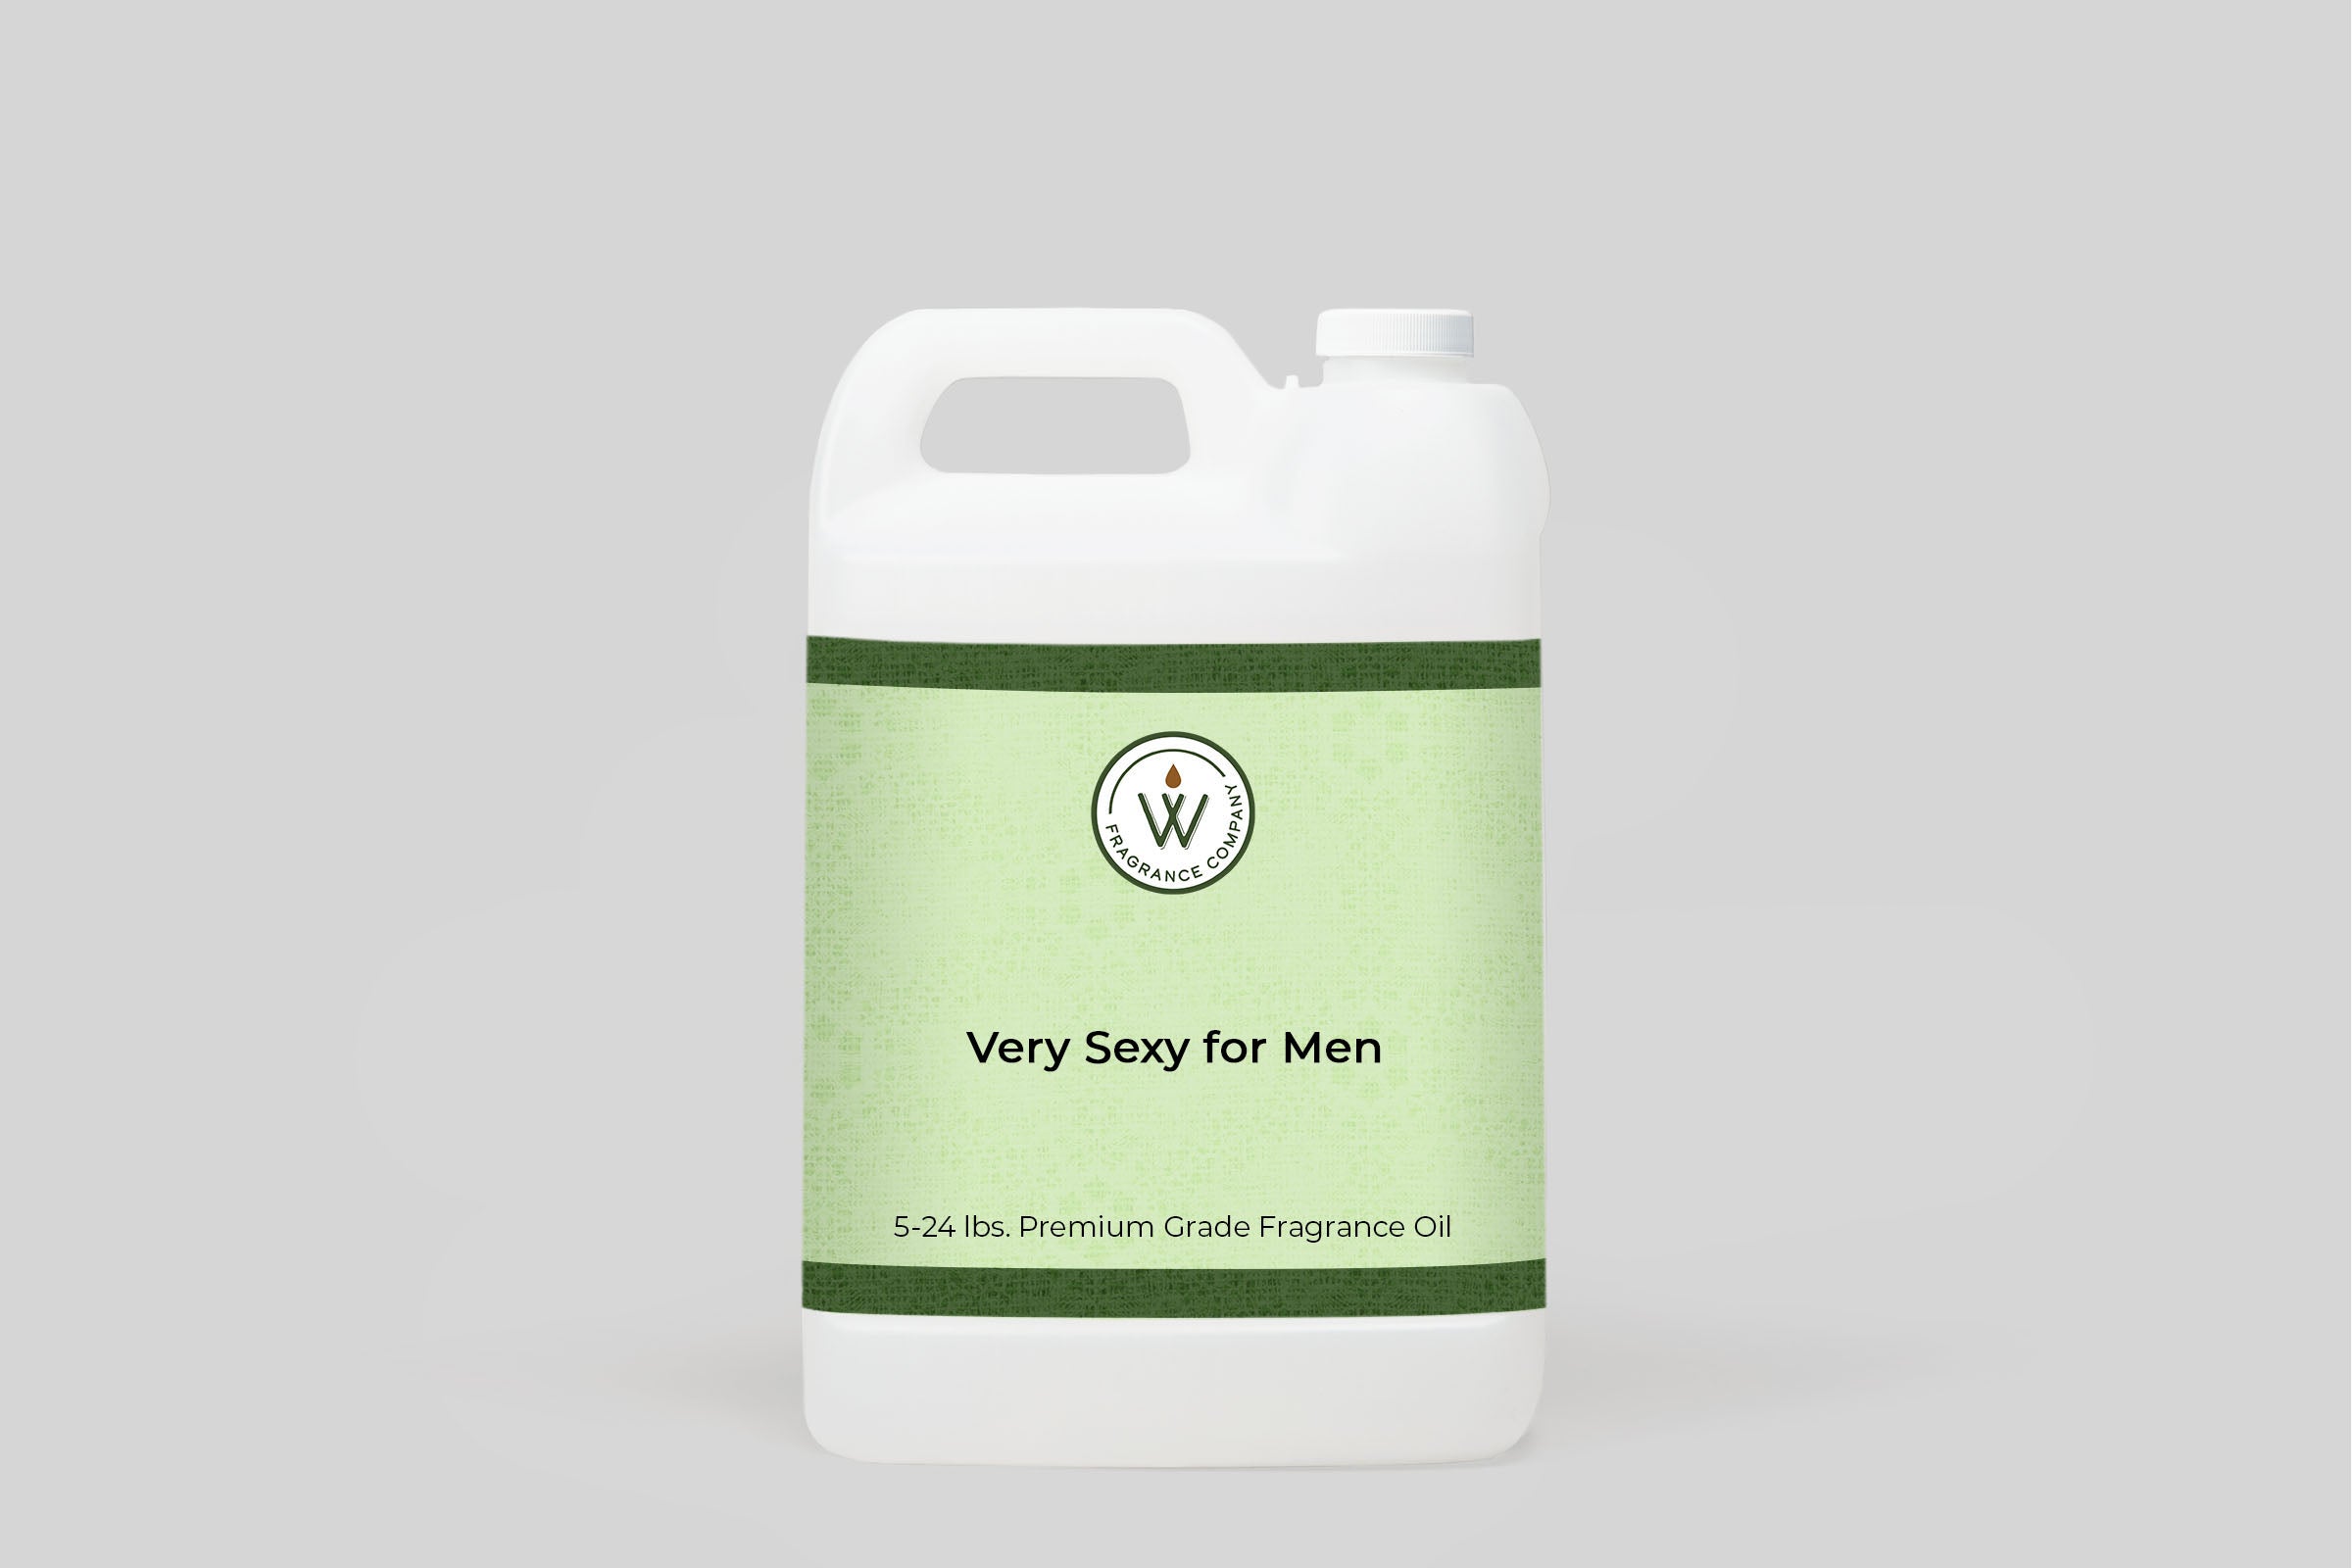 Very Sexy for Men Fragrance Oil